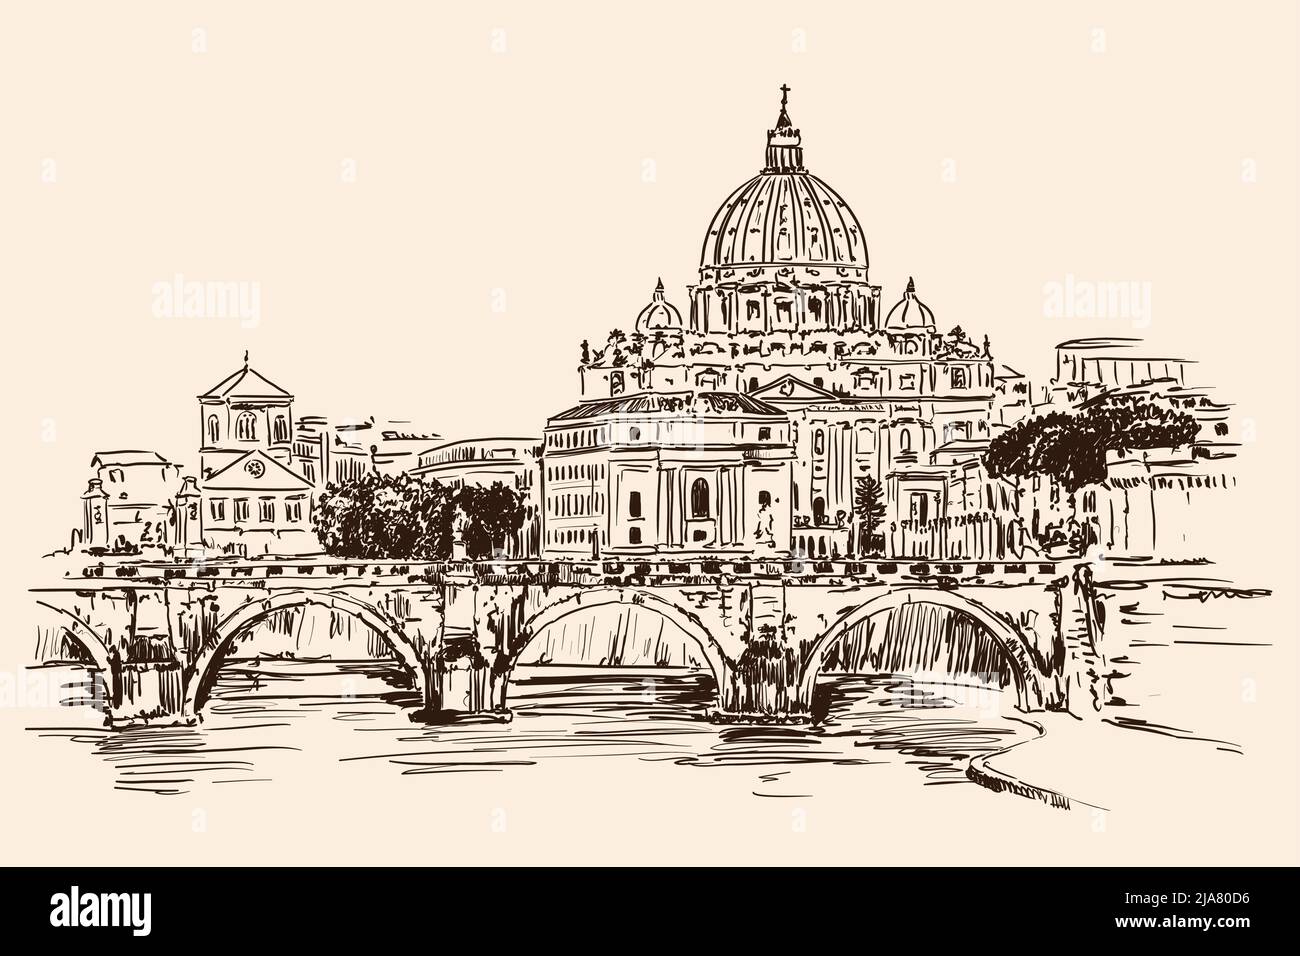 View of the Cathedral of St Peter over the Tiber River in Rome. Quick sketch. Stock Vector